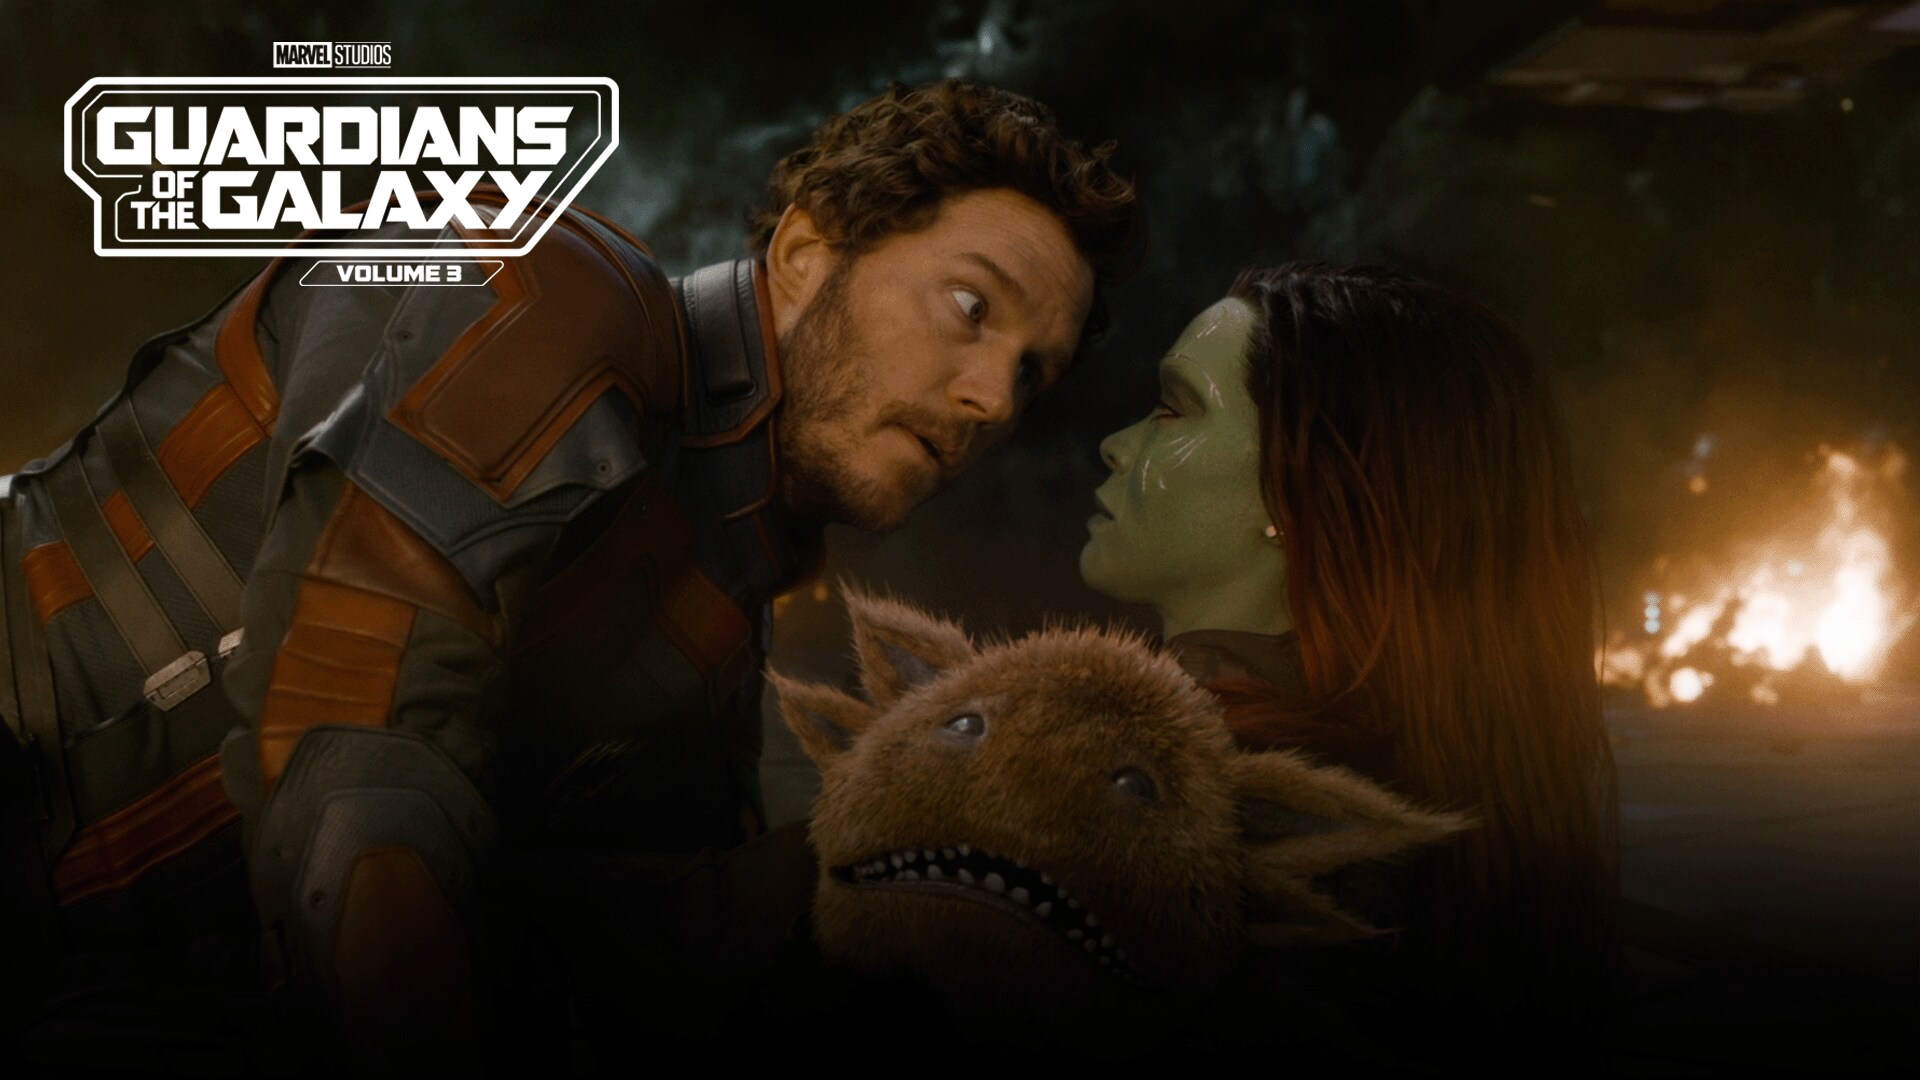 Marvel Studios’ Guardians of the Galaxy Vol. 3 | Get Tickets Now